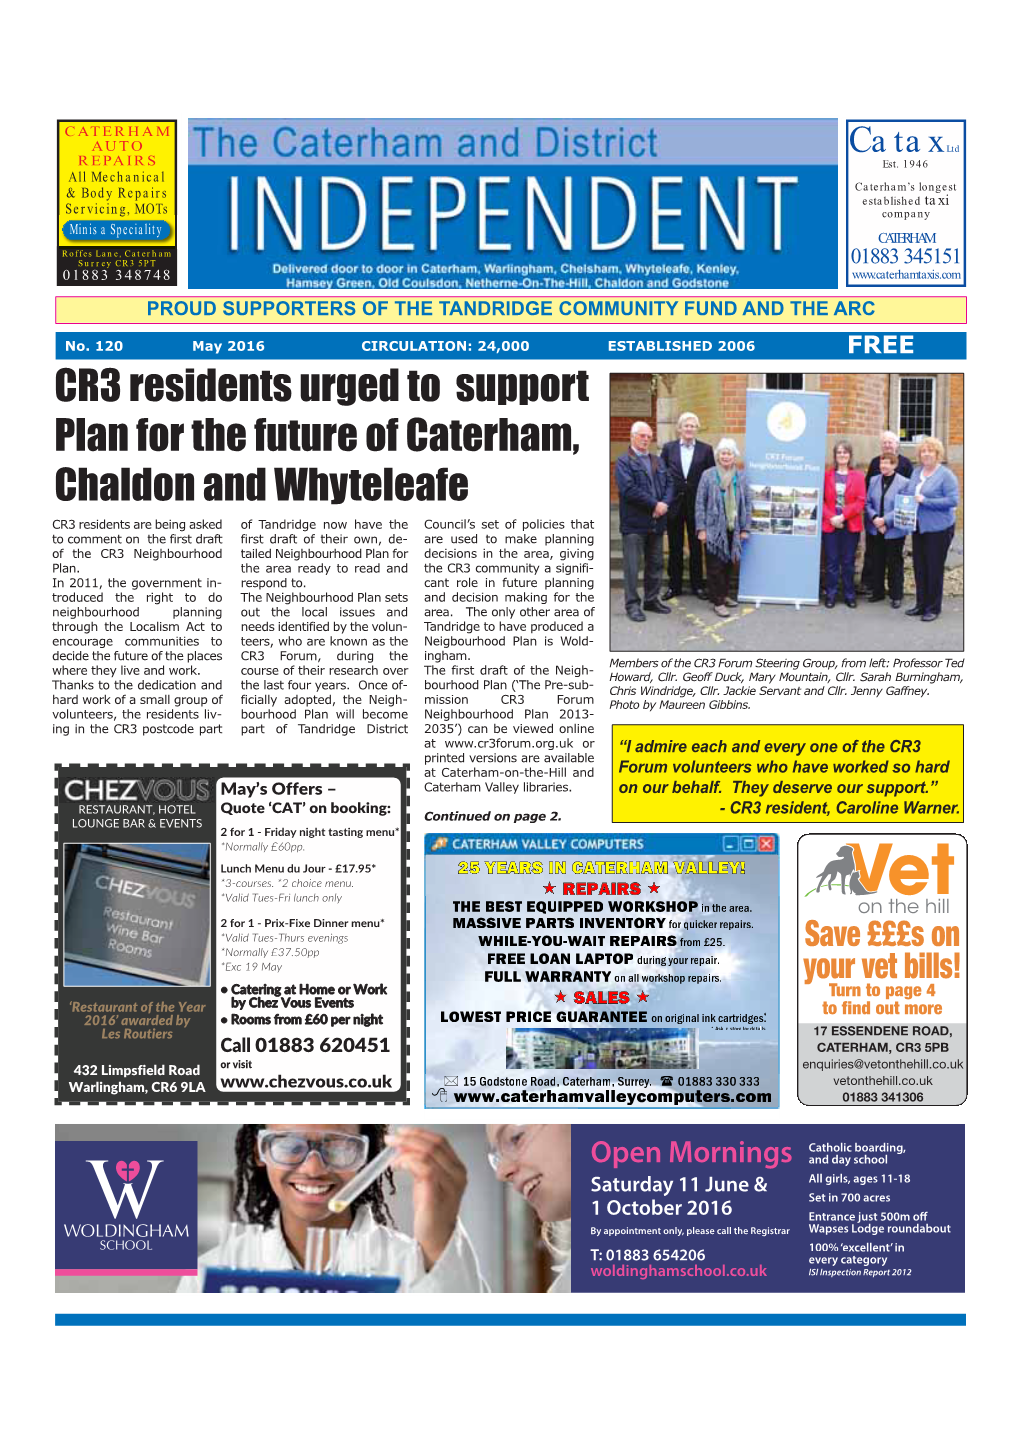 CR3 Residents Urged to Support Plan for the Future of Caterham, Chaldon and Whyteleafe